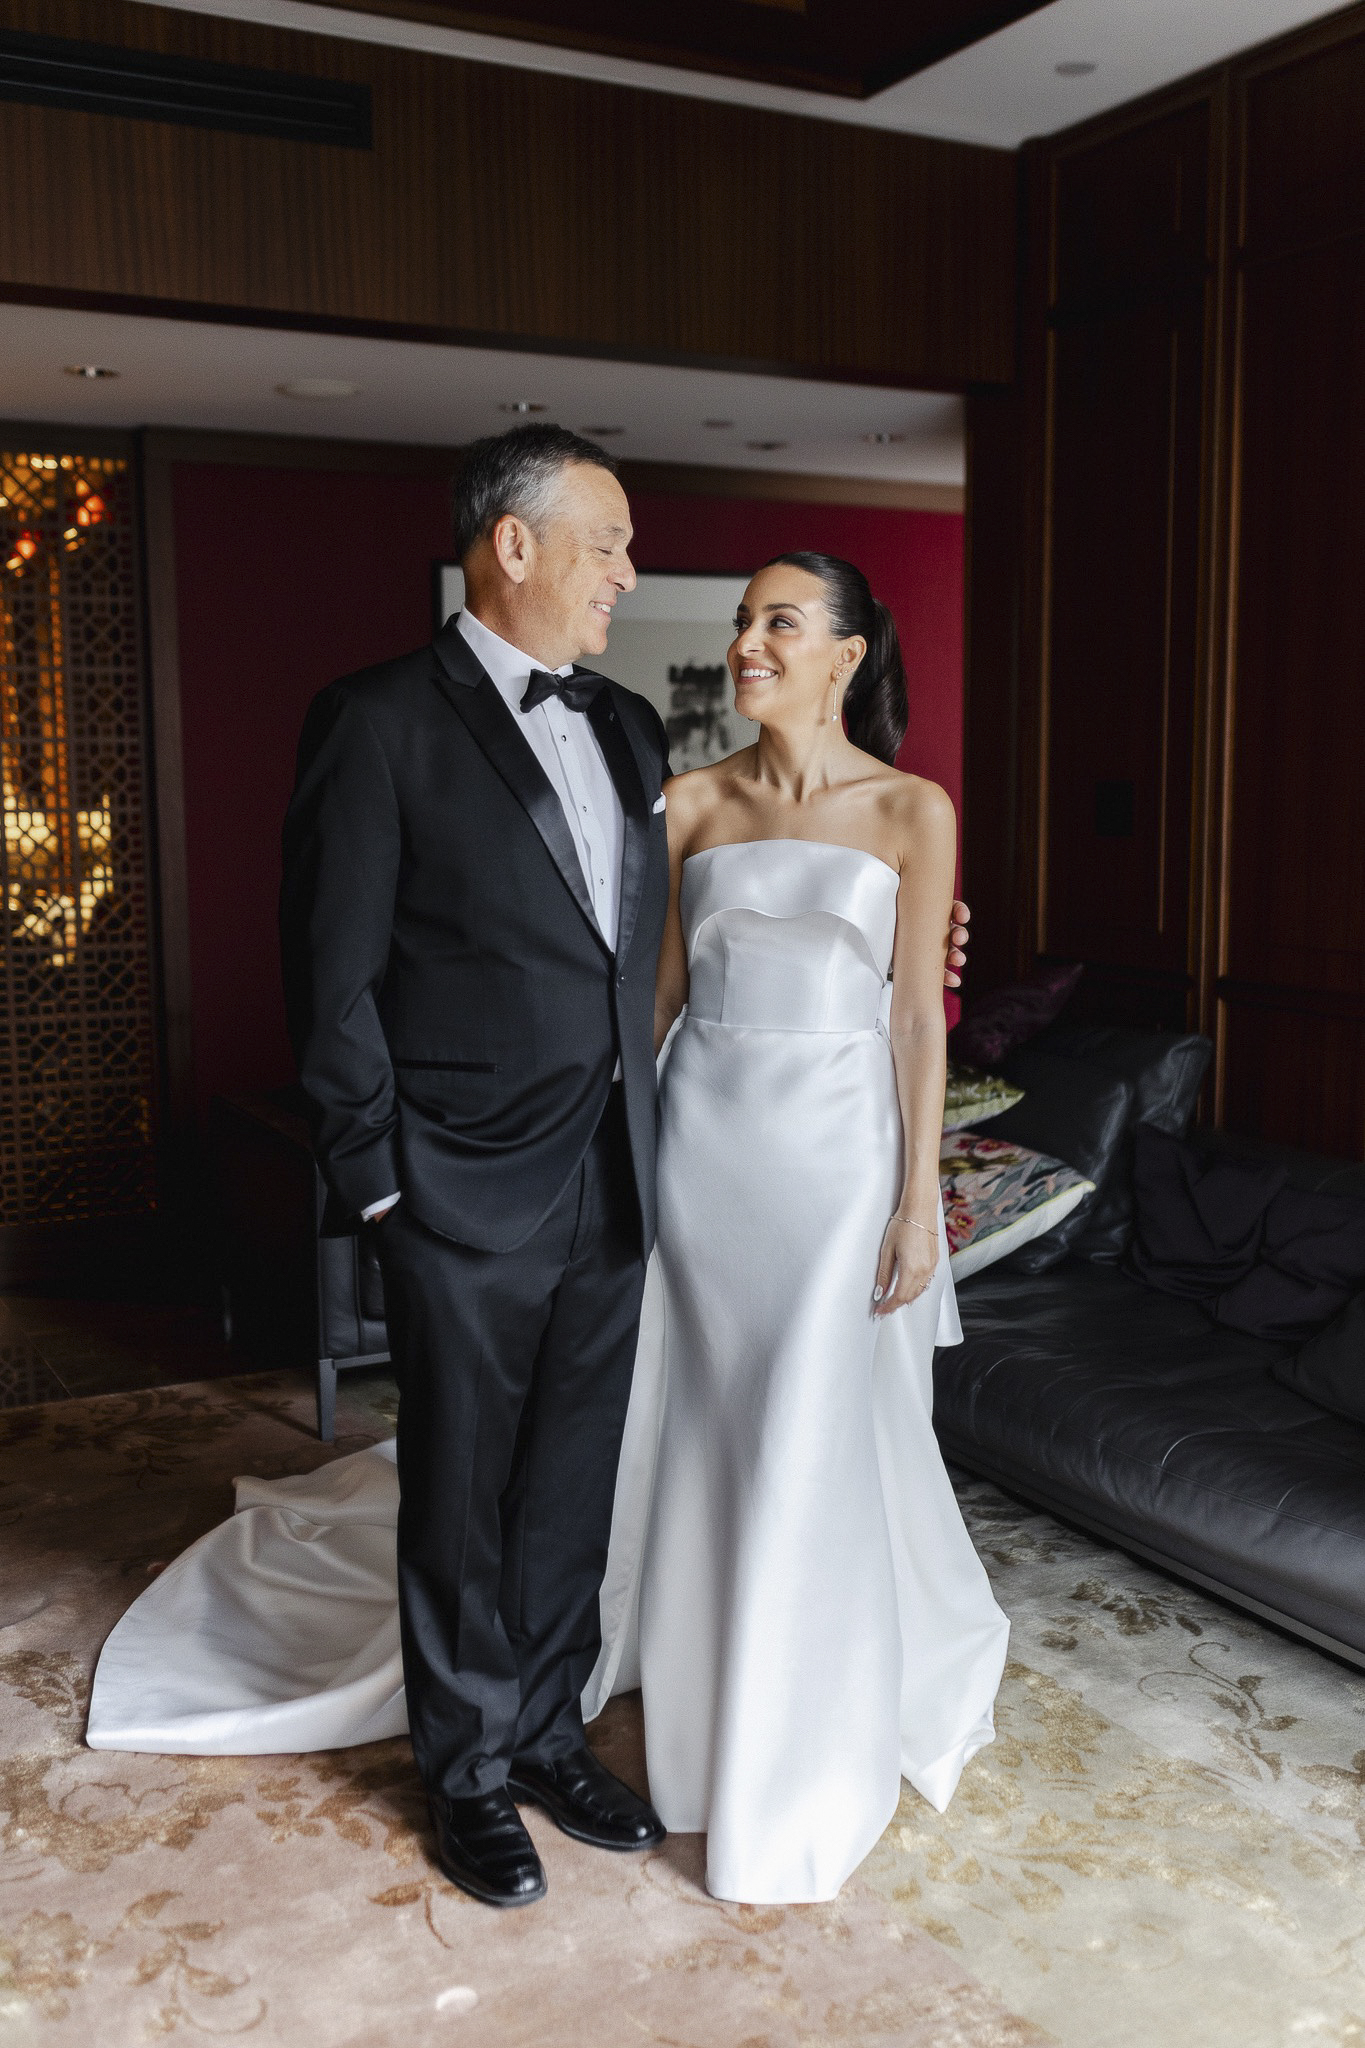 Portrait of bride with her dad in hotel suite.